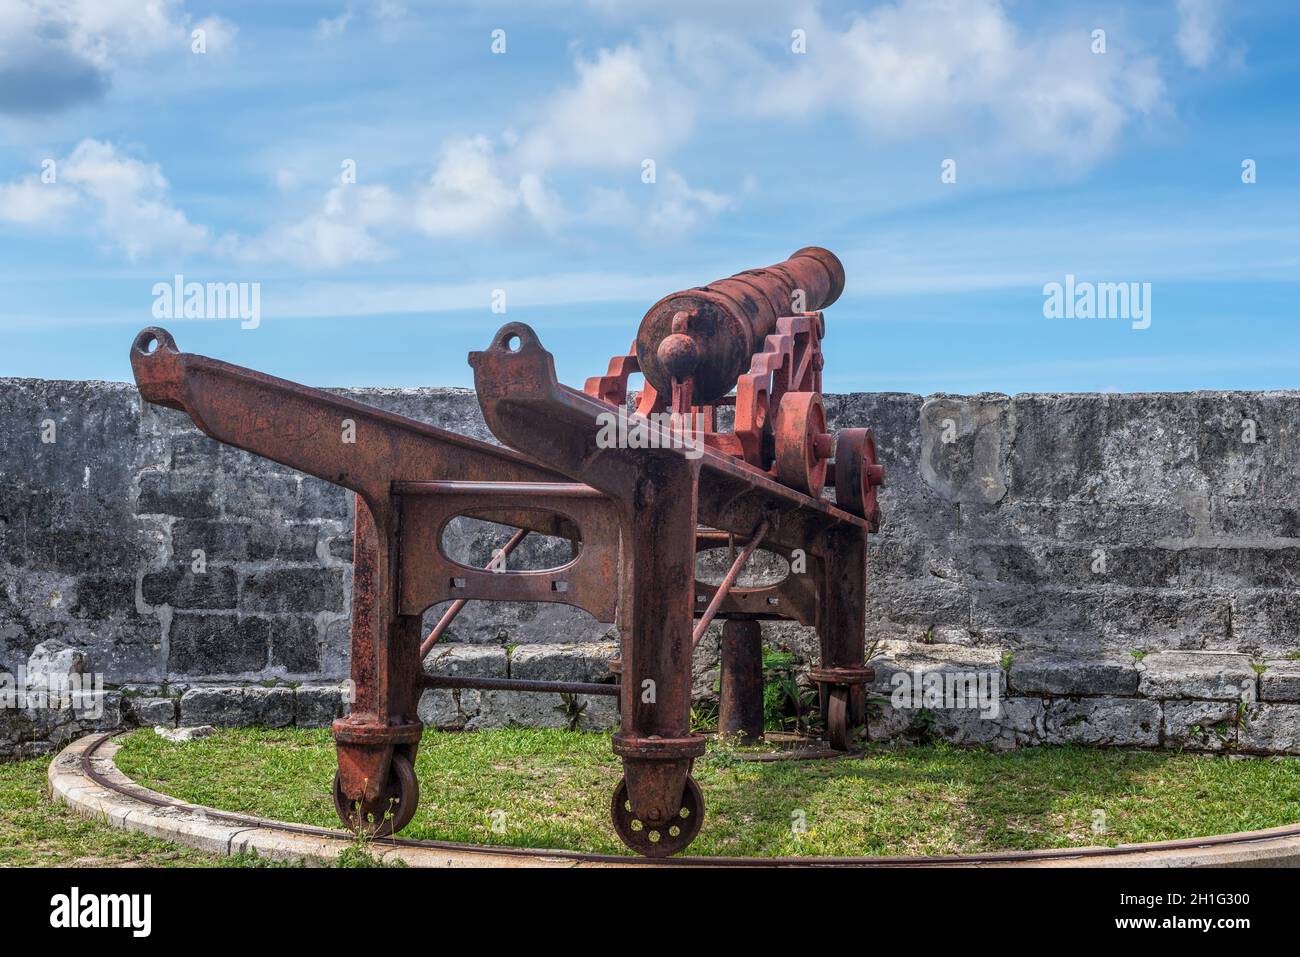 1800s Era Cannon at Fort Fincastle overlooking the harbor in Nassau, New Providence, Bahamas Stock Photo